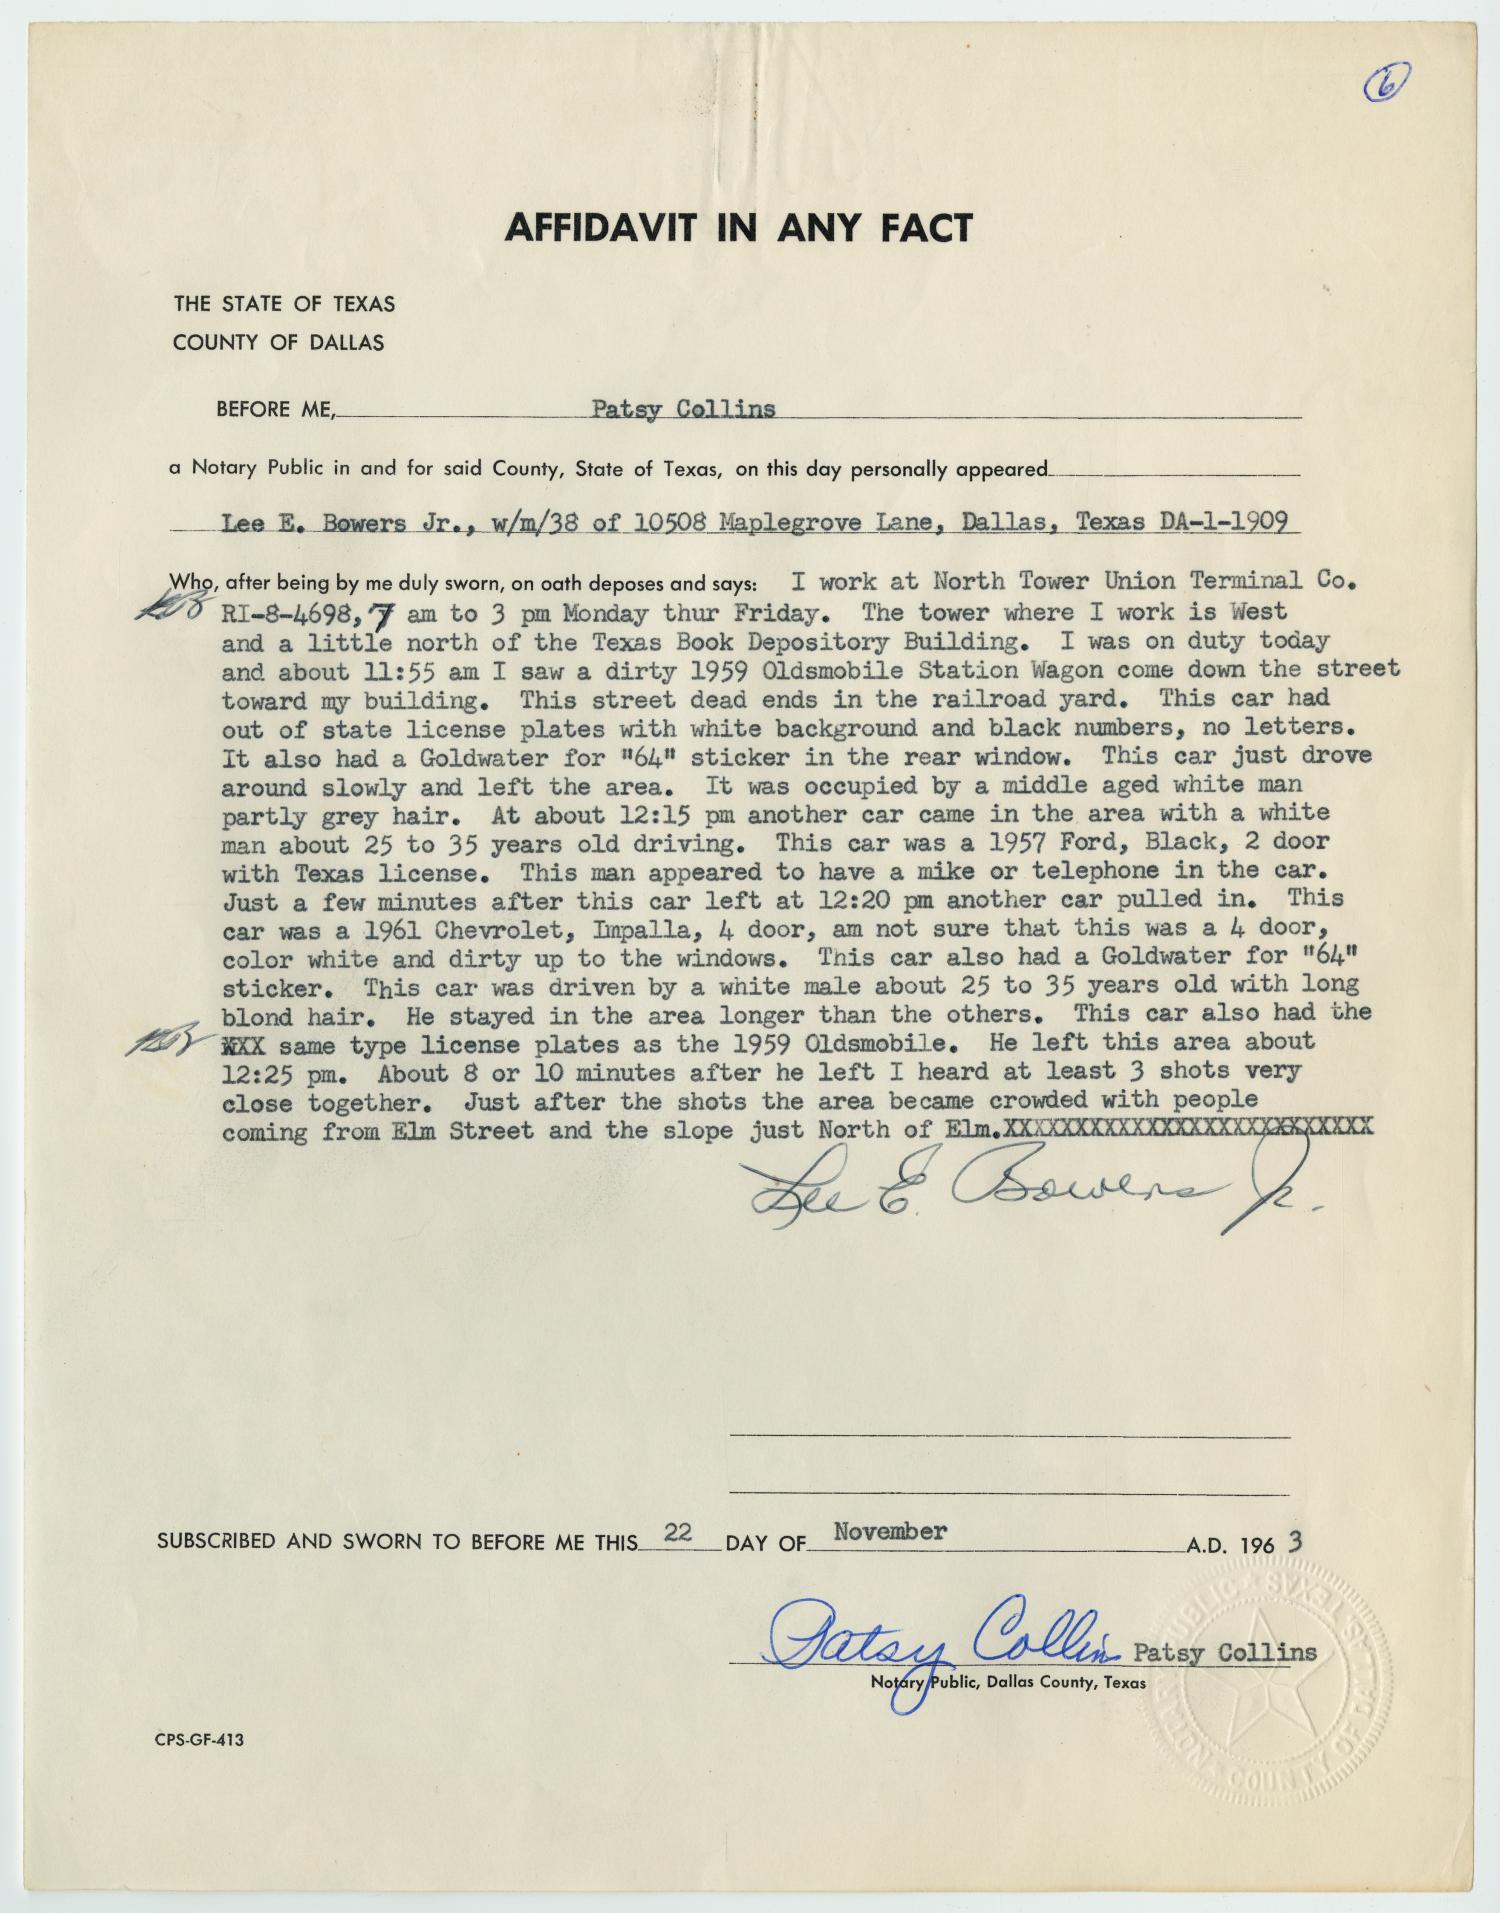 Affidavit in Any Fact - Statement by Lee E. Bowers, November 22, 1963 #1] -  The Portal to Texas History